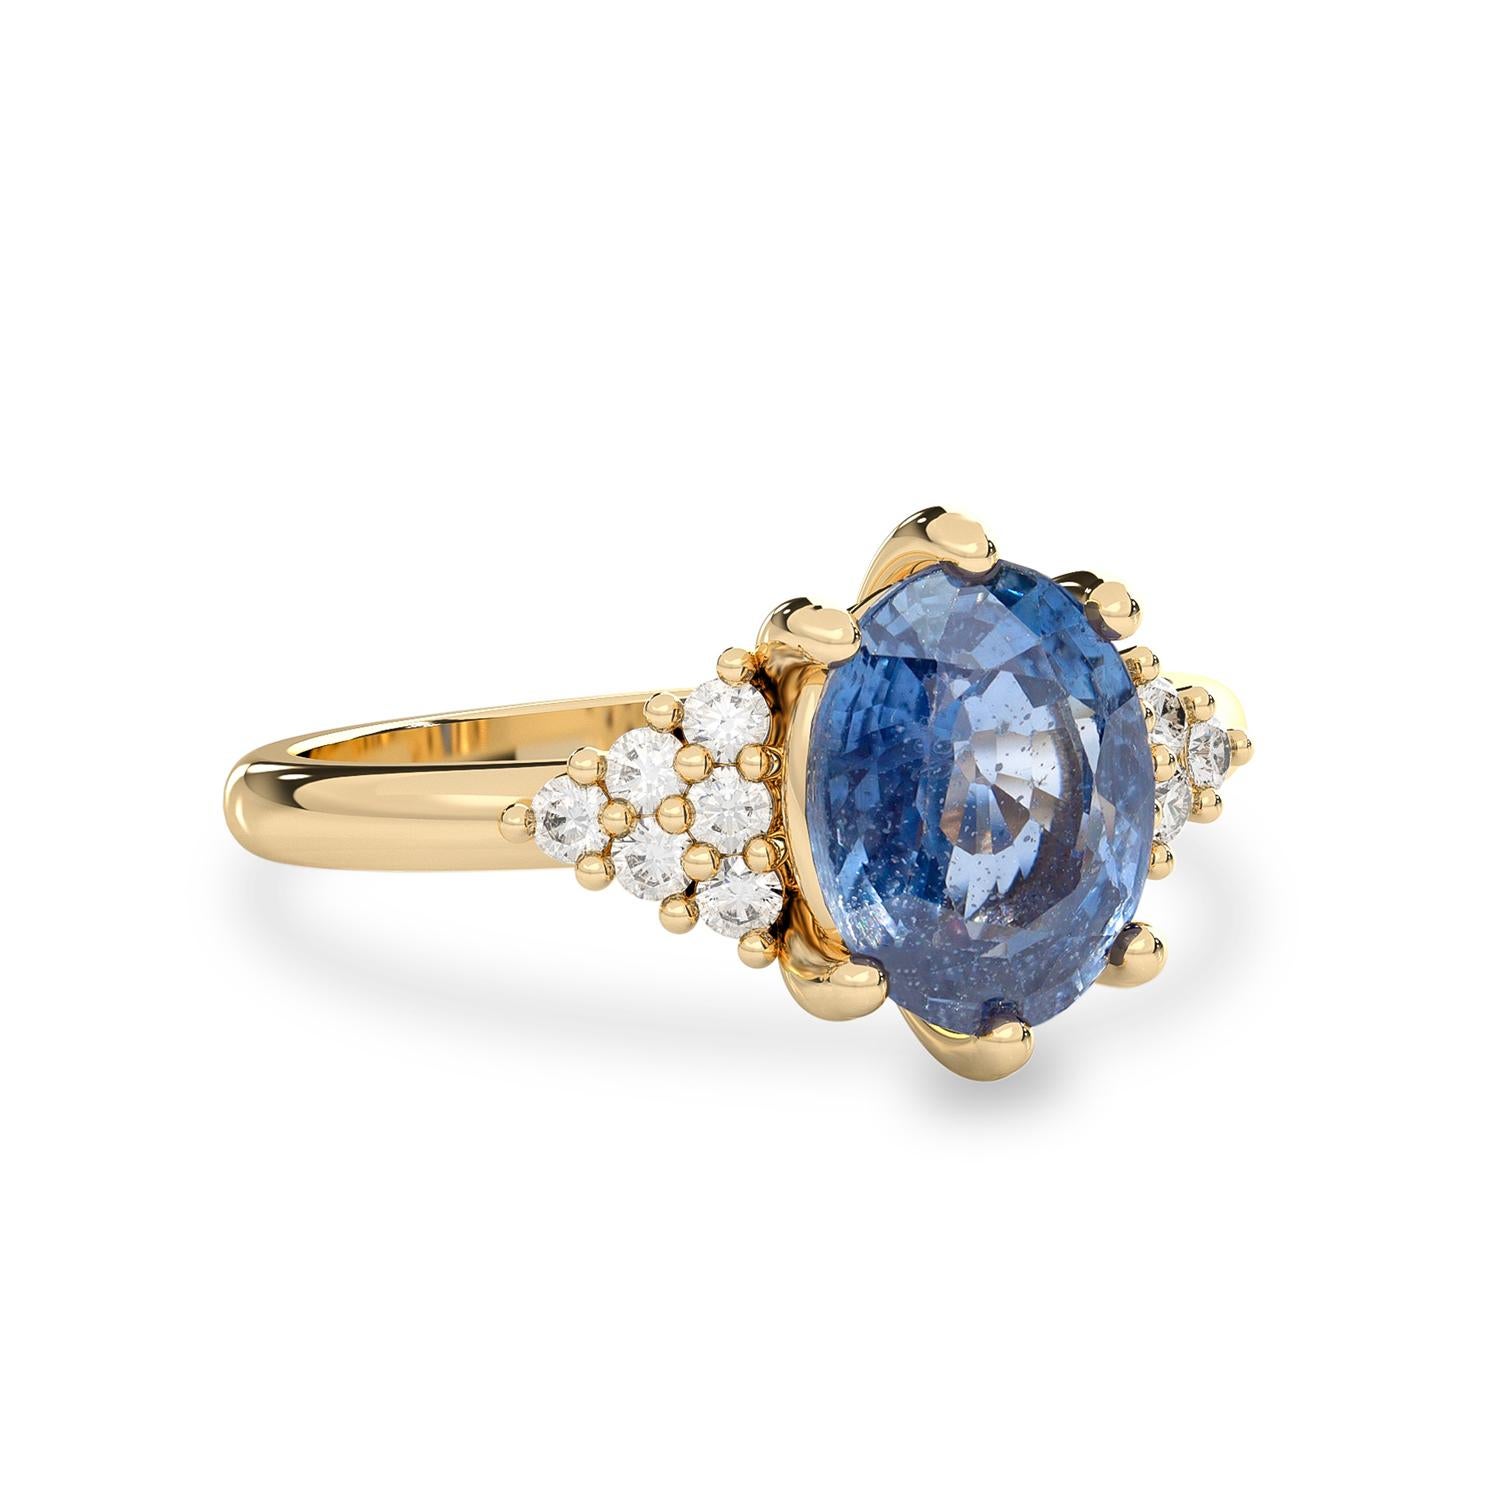 Classic simplicity defines this elegant Emma Engagement Ring, which features a 14k yellow gold straight comfort fit ring shank under the triangle form diamond accent on each side of the natural blue sapphire. The center stone features an